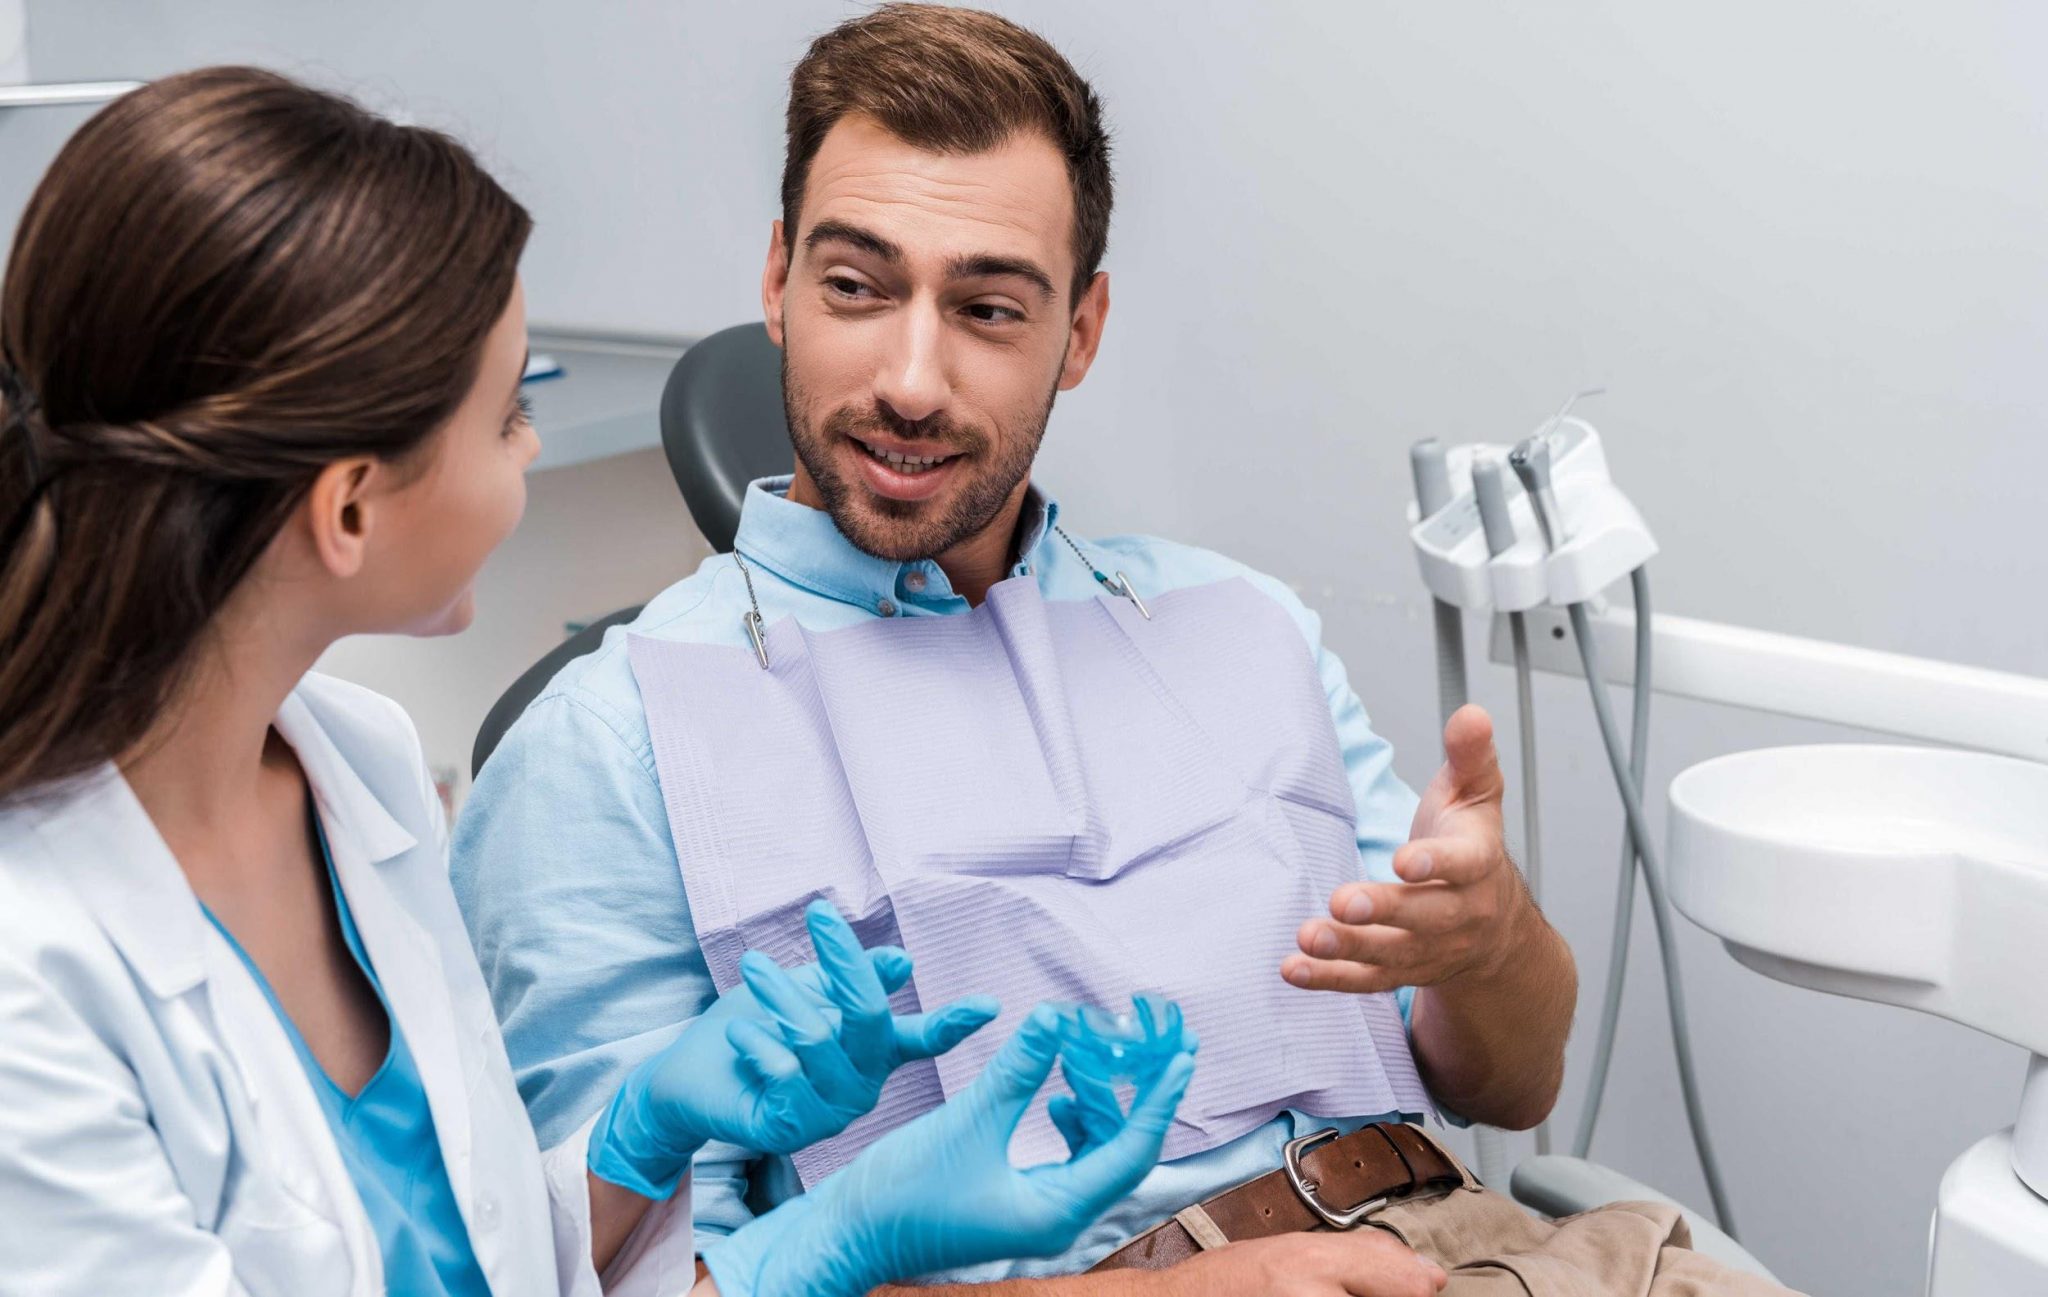 can chemo treatments affect your teeth